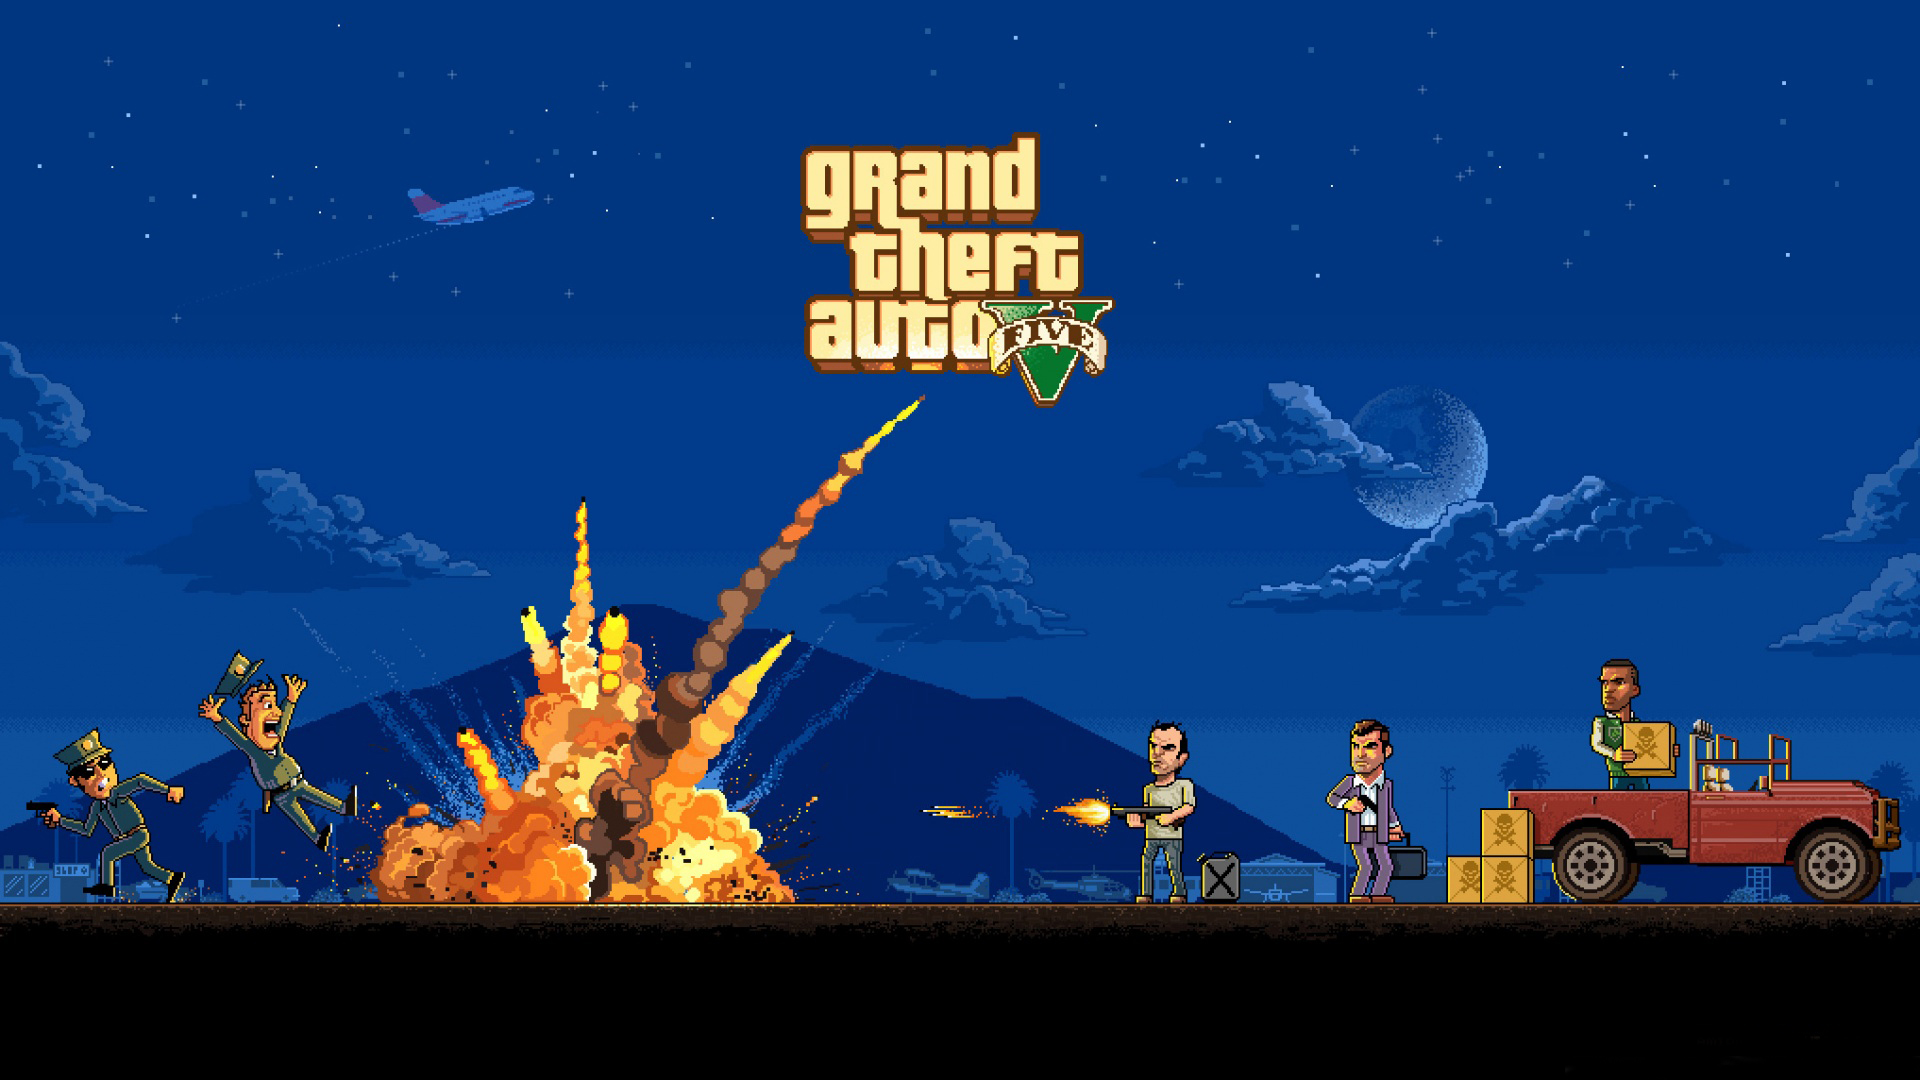 pixel art wallpaper,games,action adventure game,adventure game,pc game,fictional character